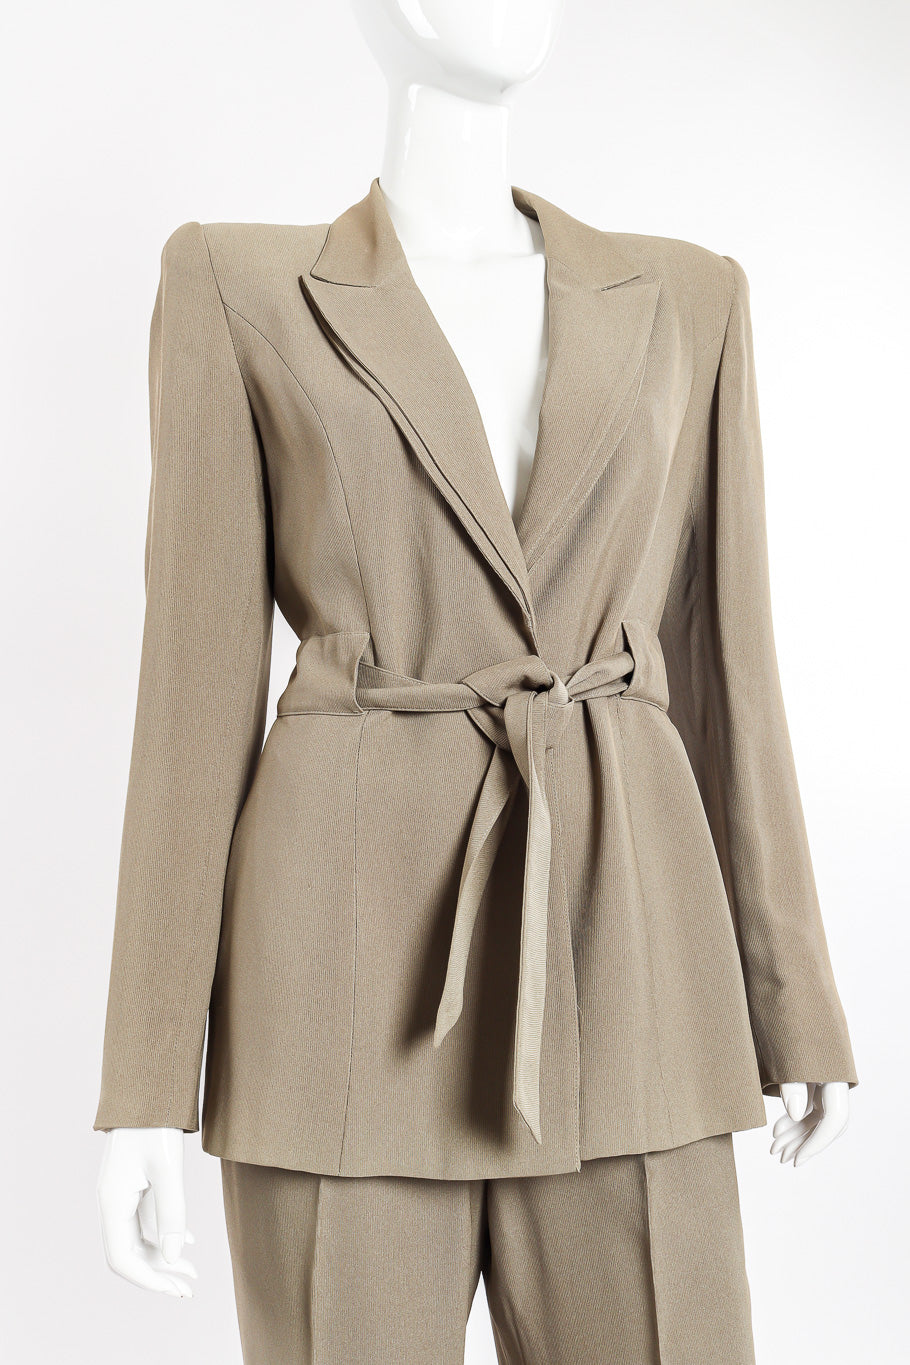  Jacket and pant suit set by State of Claude Montana on mannequin angled close up @recessla